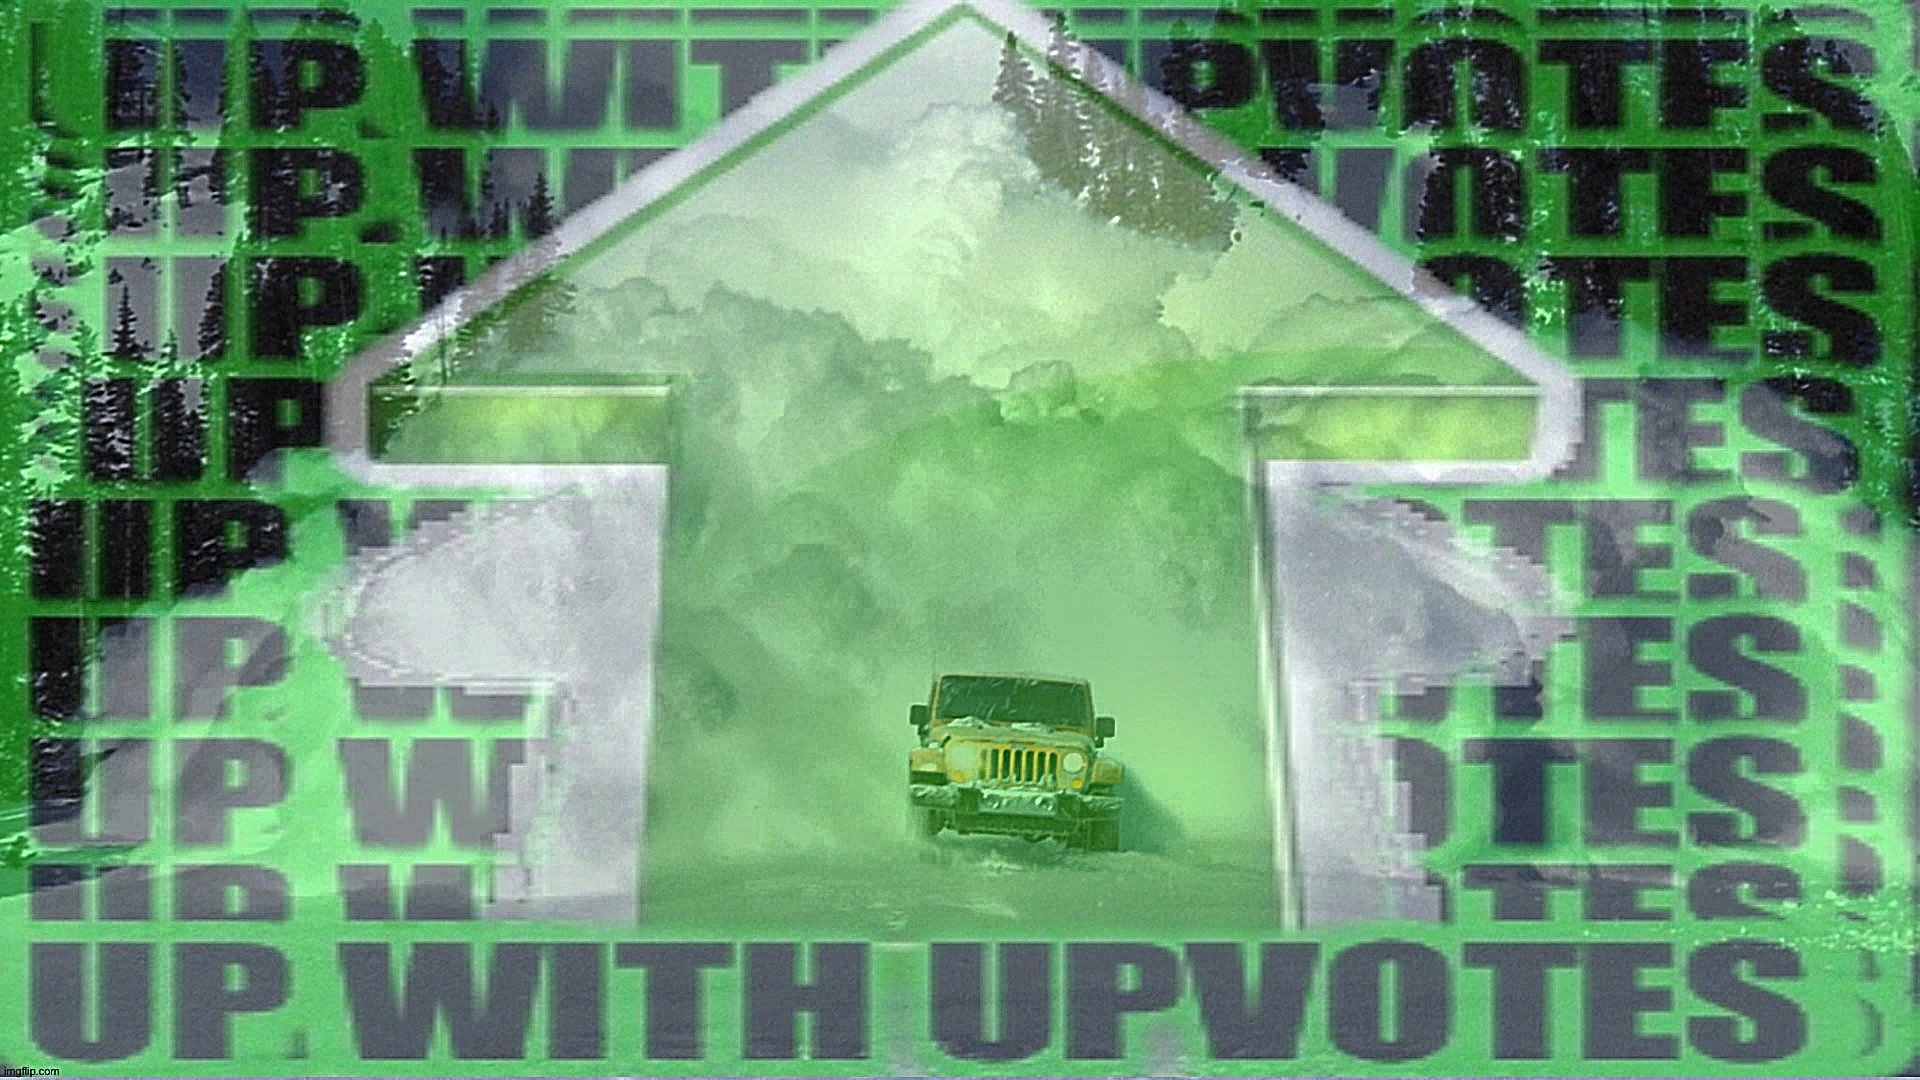 Up with upvotes avalanche | image tagged in up with upvotes avalanche,upvotes,upvote,upvoting,avalanche,custom template | made w/ Imgflip meme maker